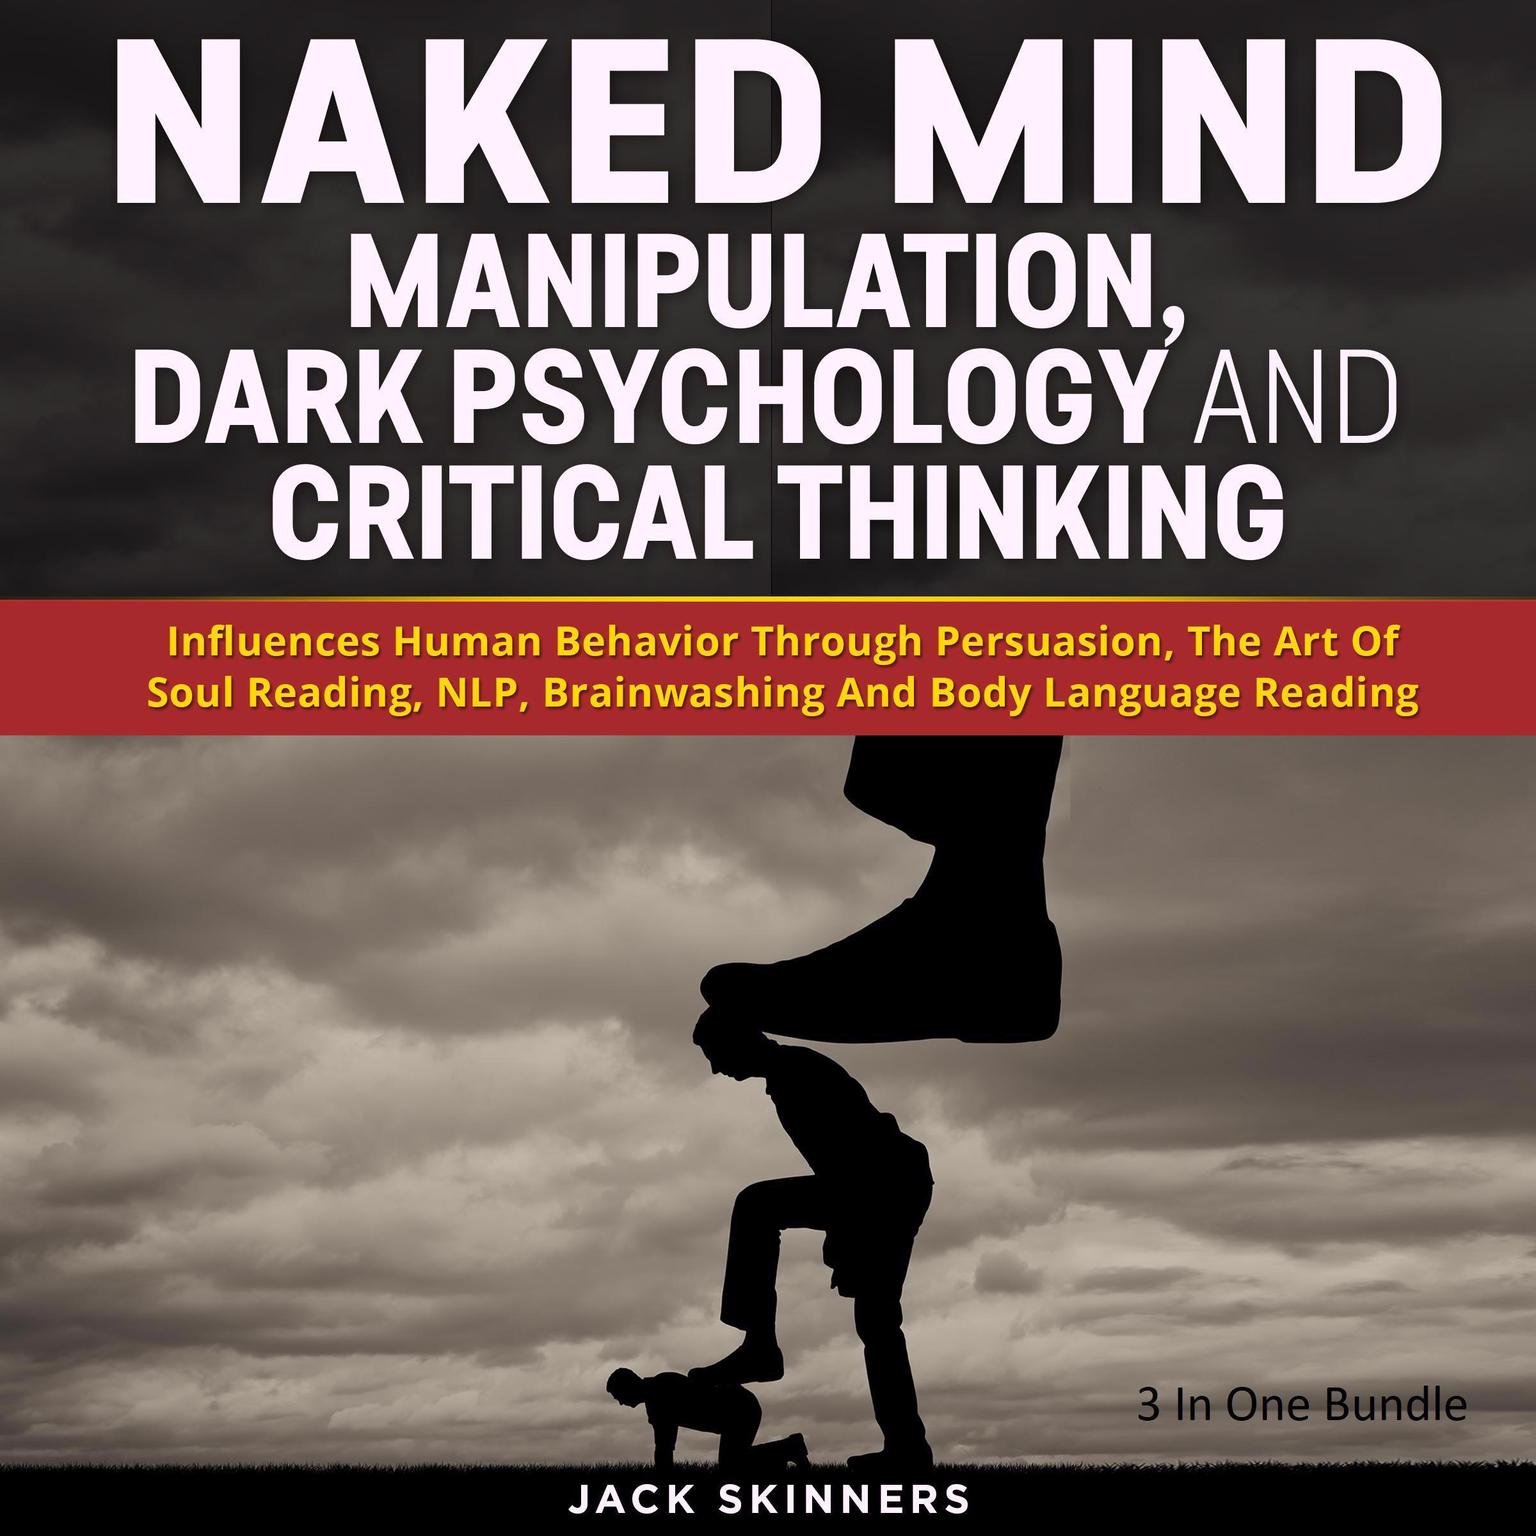 Naked Mind: Manipulation, Dark Psychology And Critical Thinking: Influences Human Behavior Through Persuasion, The Art Of Soul Reading, NLP, Brainwashing And Body Language Reading (3 books in 1) Audiobook, by Jack Skinners